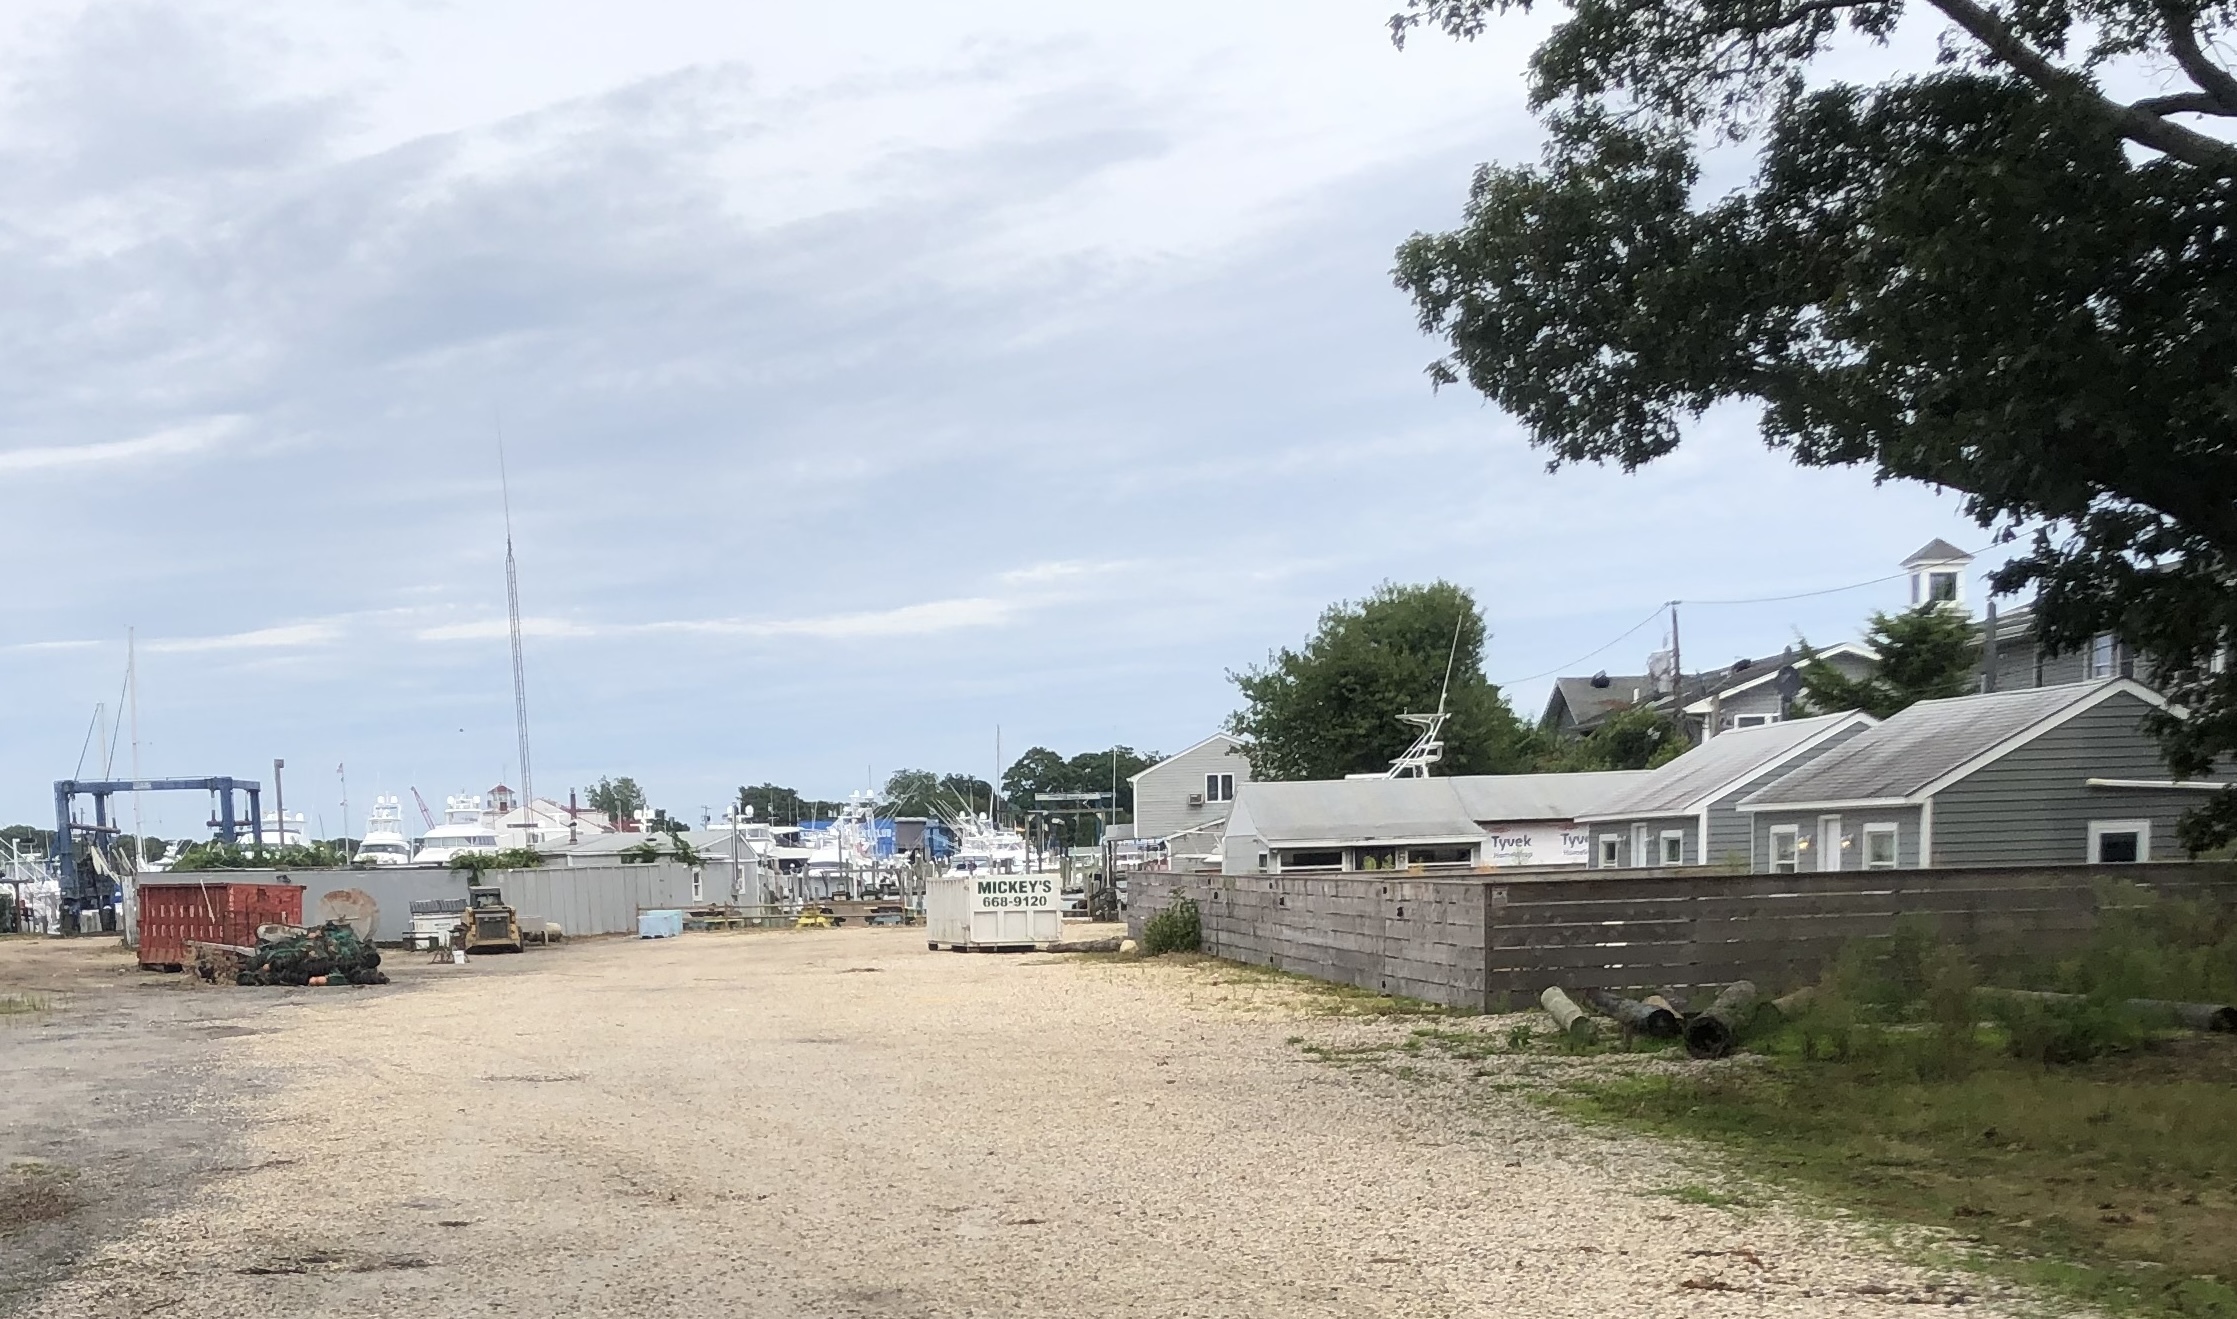 The Offshore Sports Marina in Montauk, home of Liar's Saloon, has been dormant this year but was purchased by Sam Gershowitz, who also owns nearby Star Island Yacht Club, earlier this month.